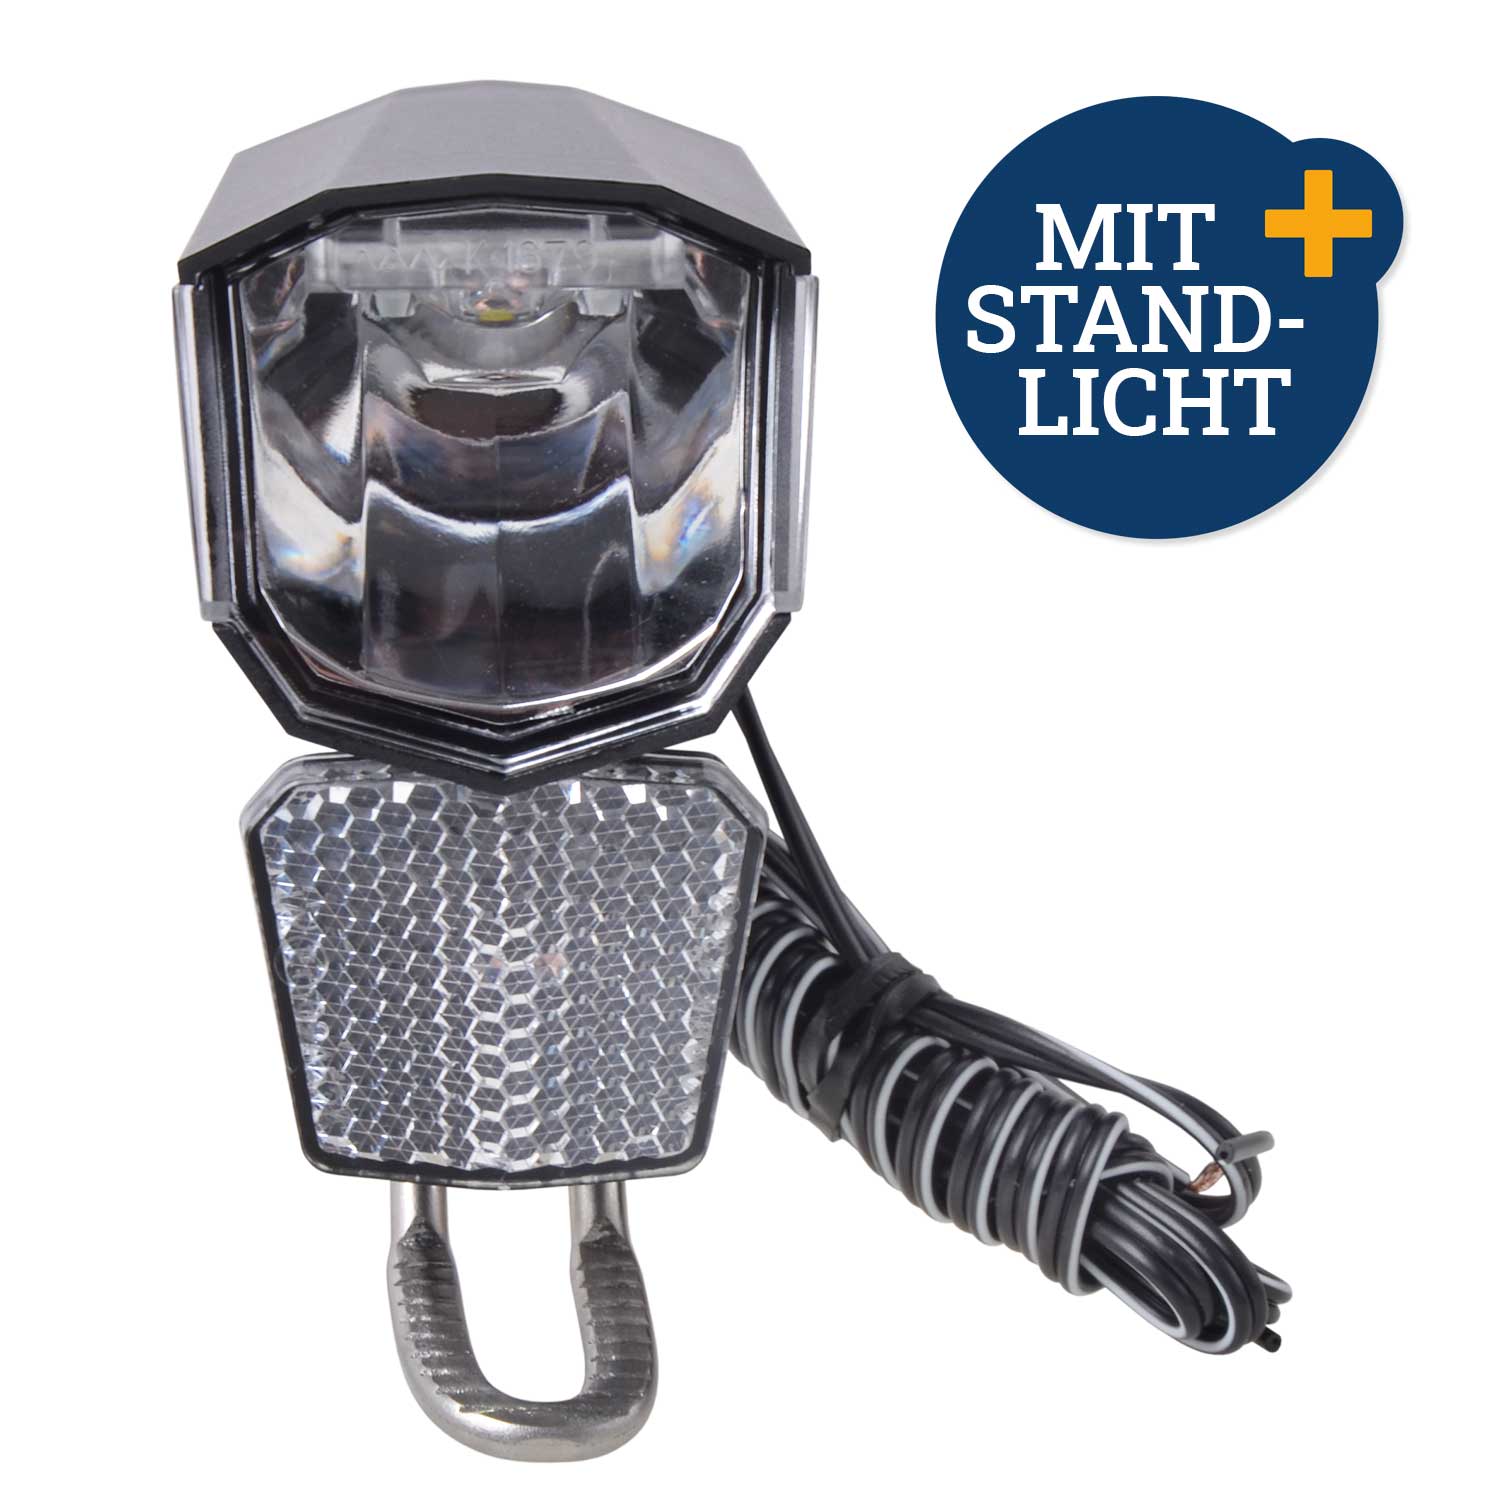 LED-Frontlicht 50 LUX